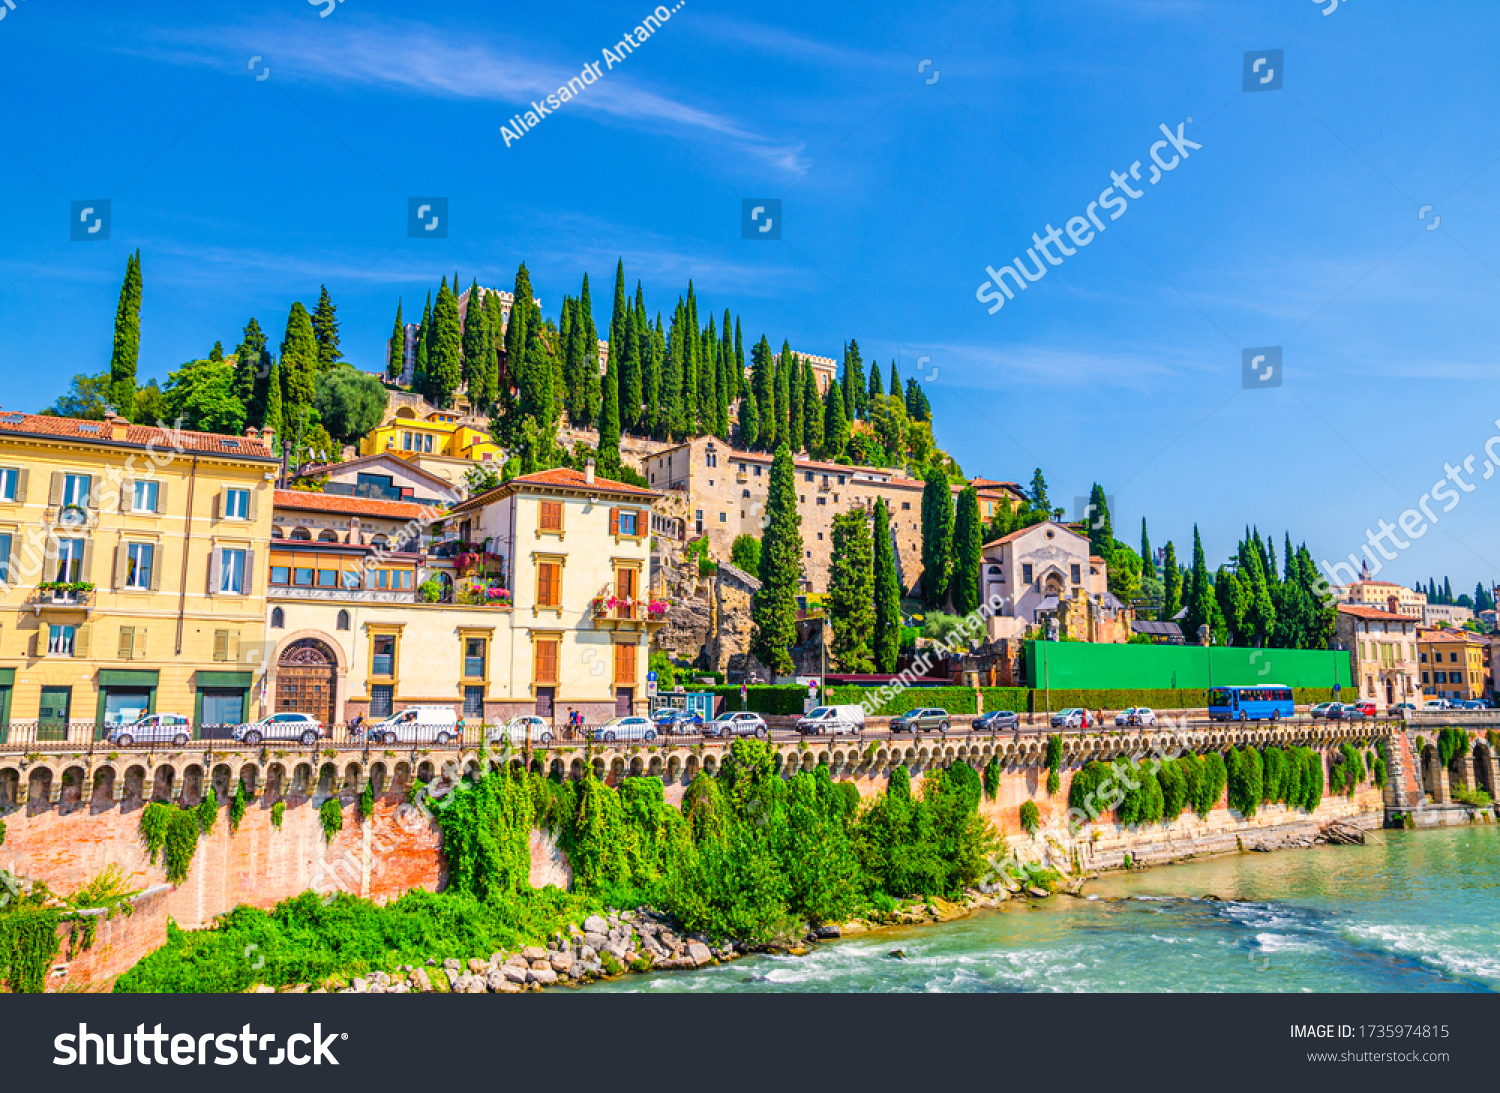 Castel San Pietro St. Peter Castle, Museo Archeologico, Convento di San Girolamo on hill with cypress trees and Adige river in Verona city historical centre, blue sky, Veneto Region, Northern Italy #1735974815